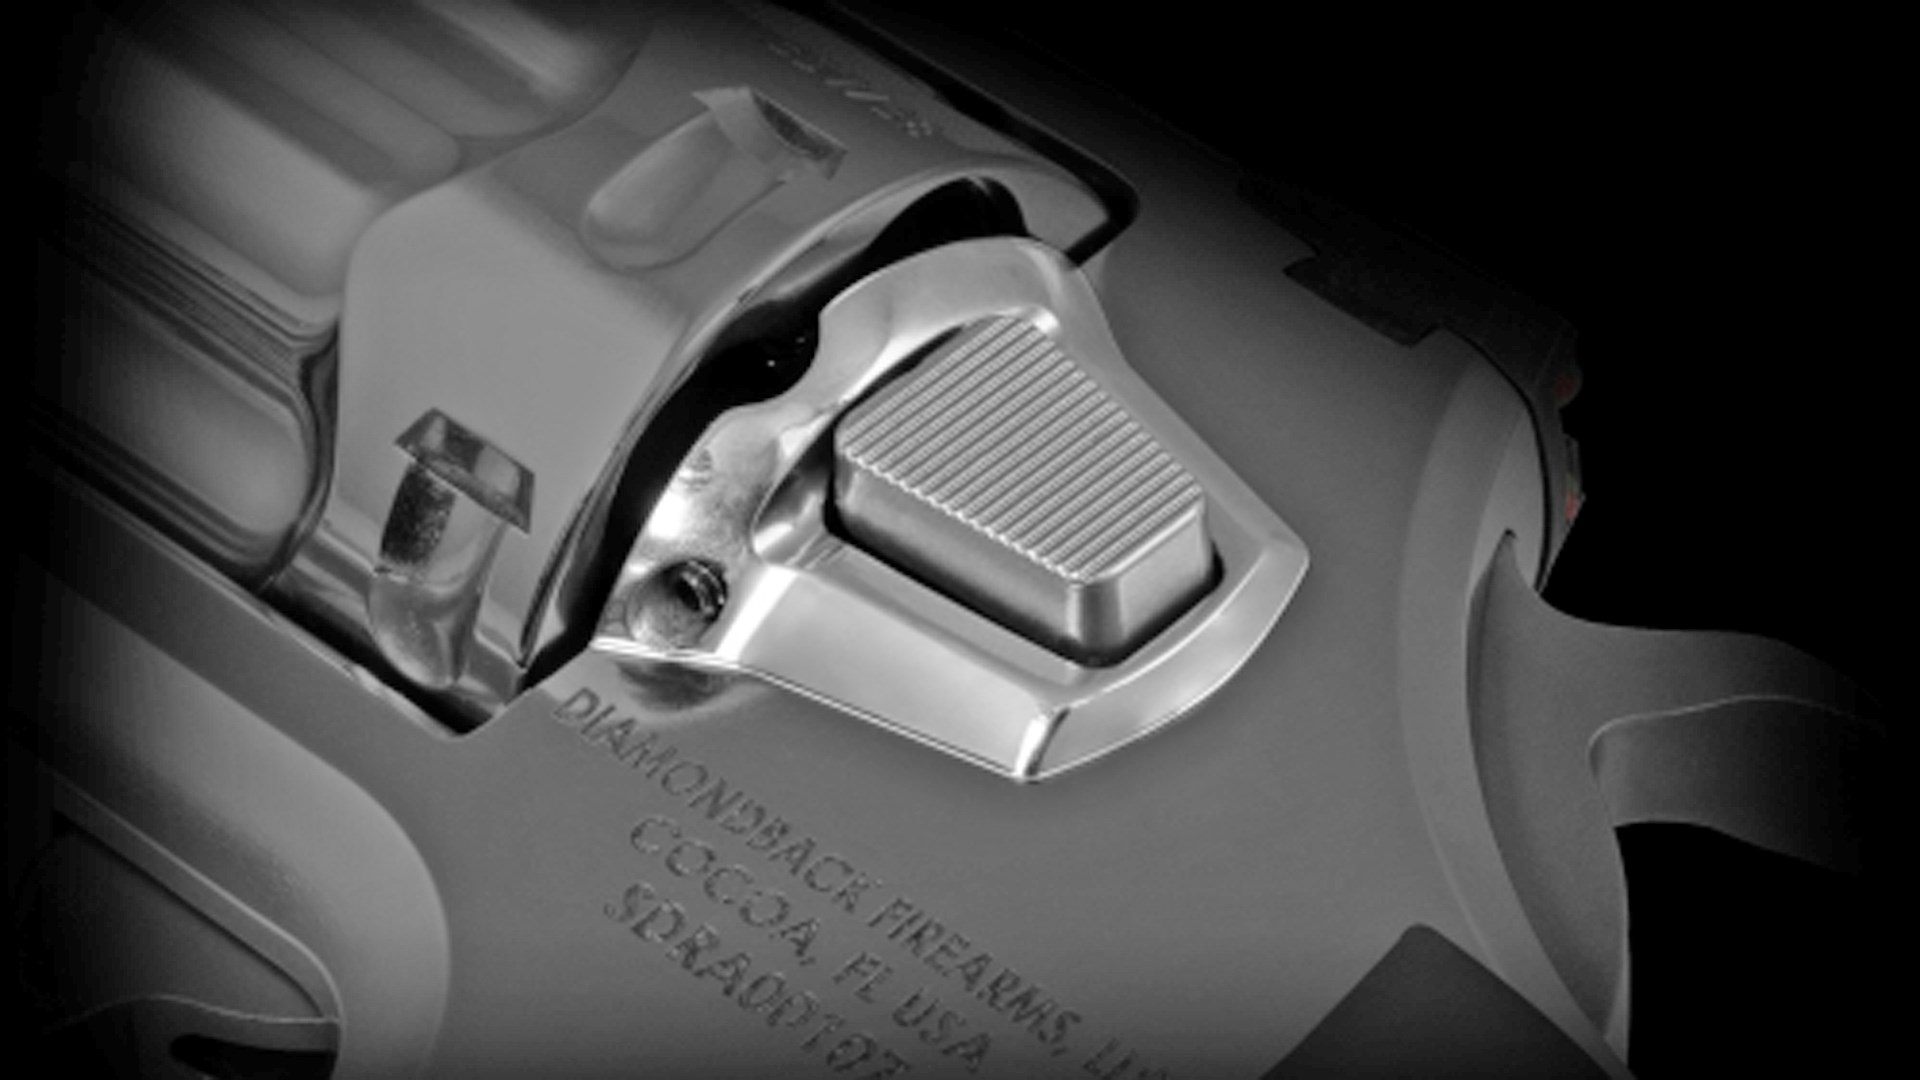 A push-button cylinder release shown on the left side of the Diamondback SDR revolver.